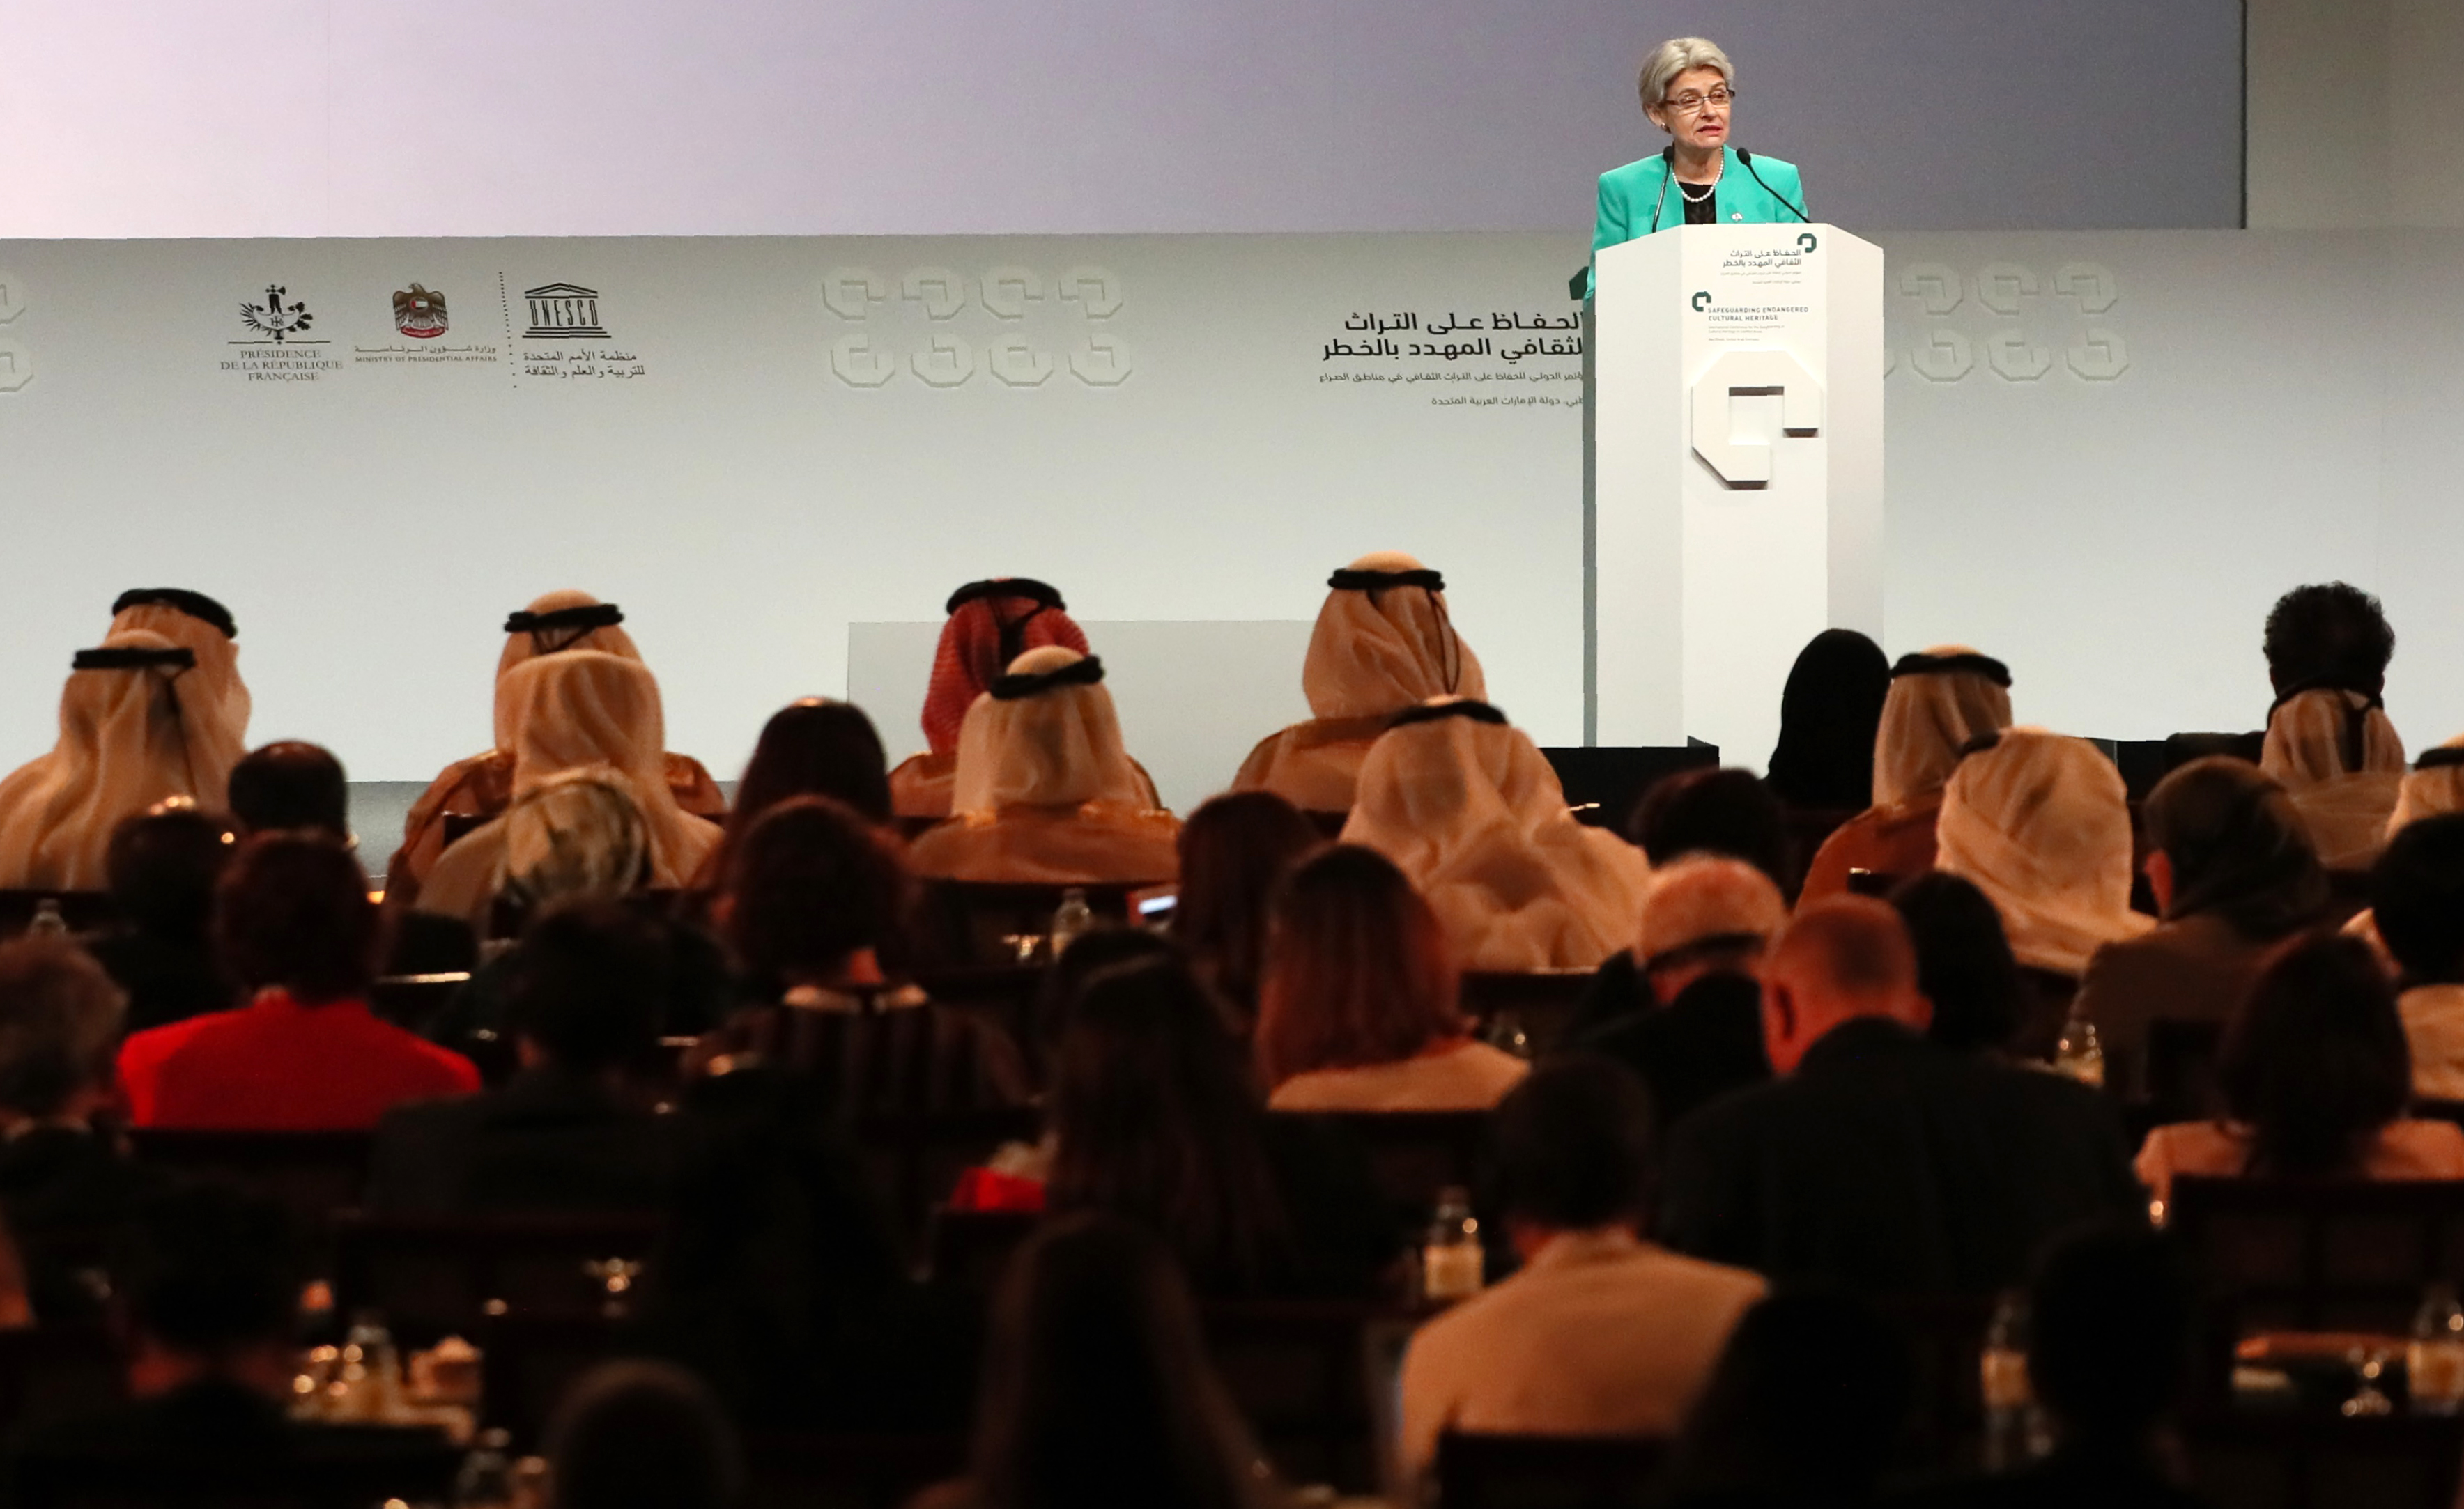 Director-General of the UN Educational, Scientific and Cultural Organization (UNESCO), Irina Bokova speaks during the opening ceremony of a conference gathering officials and experts from around the world gather to discuss forming a global alliance to protect endangered heritage sites on  December 2, 2016 in Abu Dhabi.    / AFP PHOTO / KARIM SAHIB